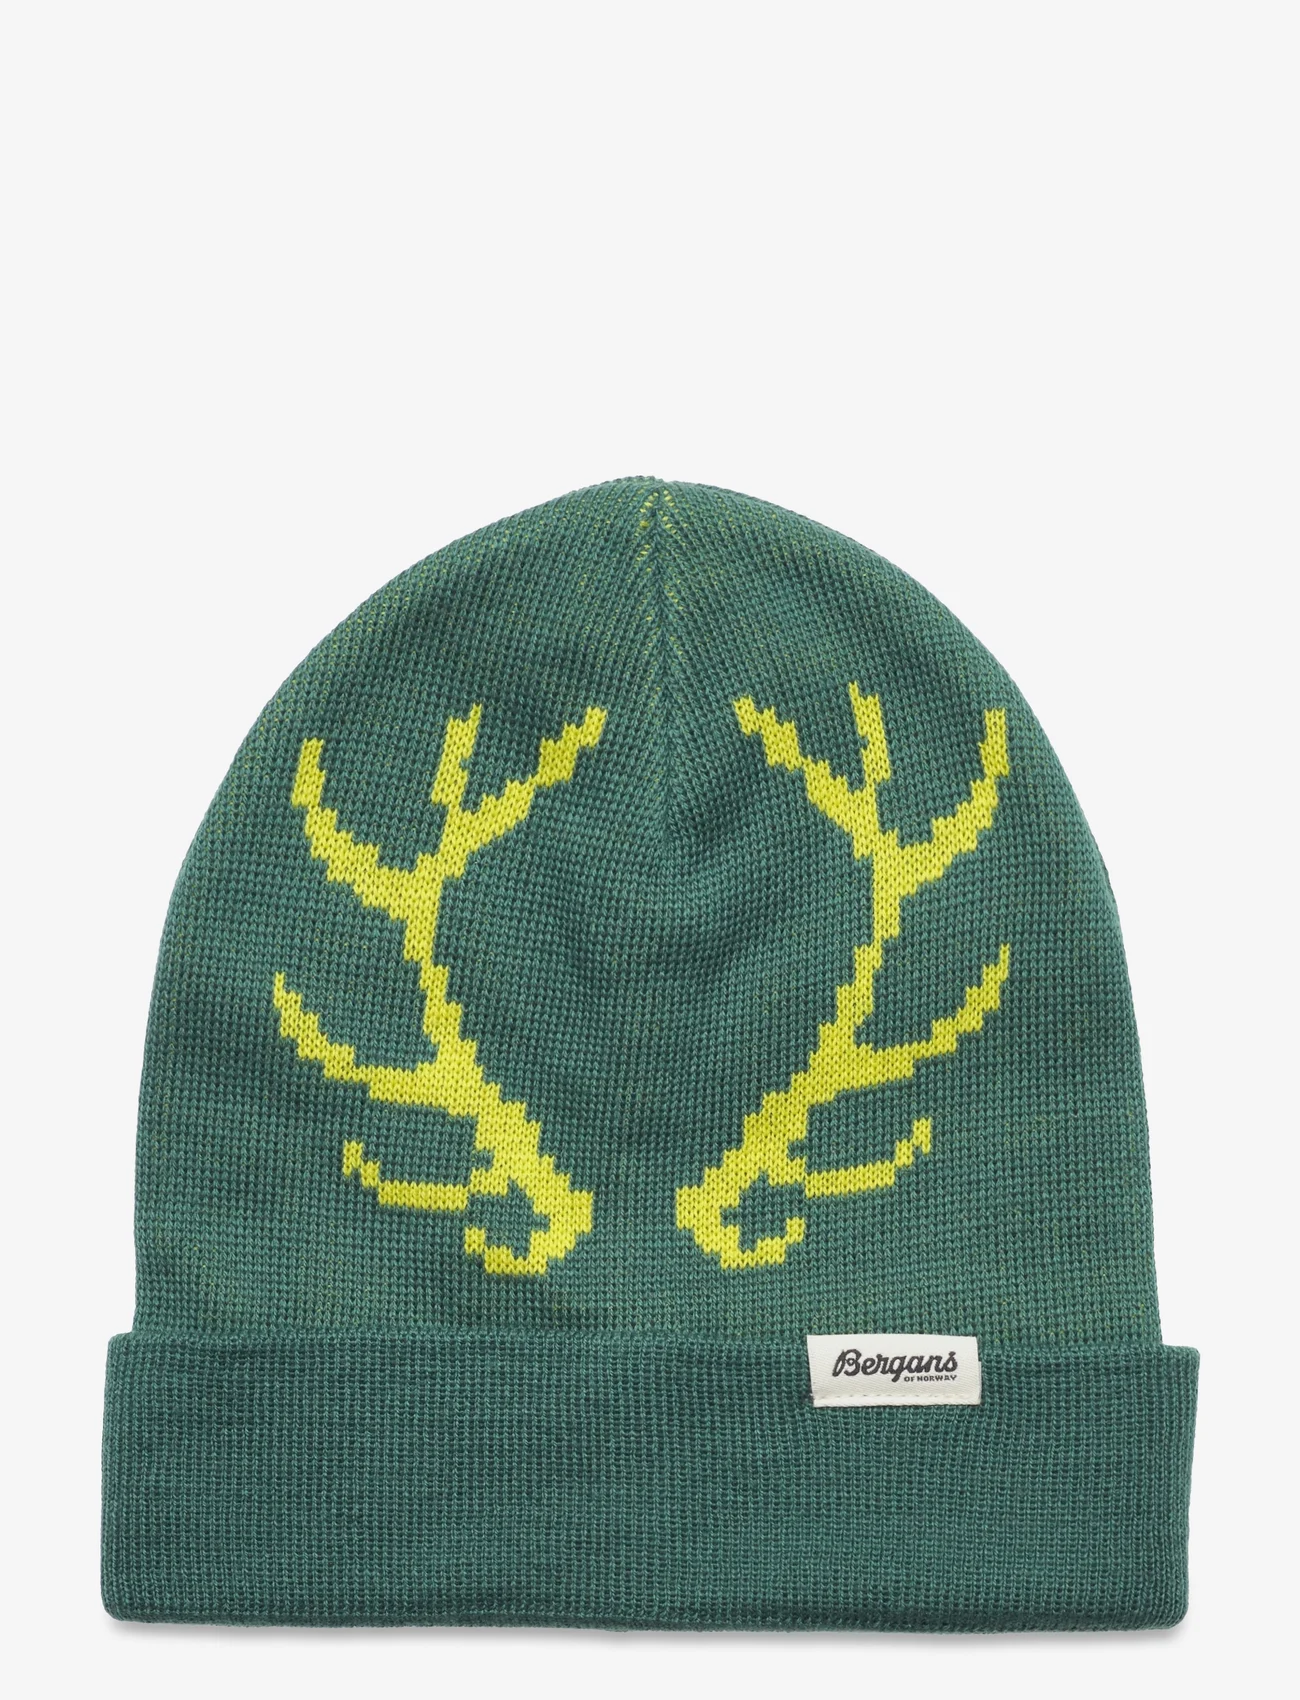 Bergans - Antlers Kids Beanie Dark Creamy Rouge/Light Creamy Rouge One Size - beanies - forest frost/pineapple - 0